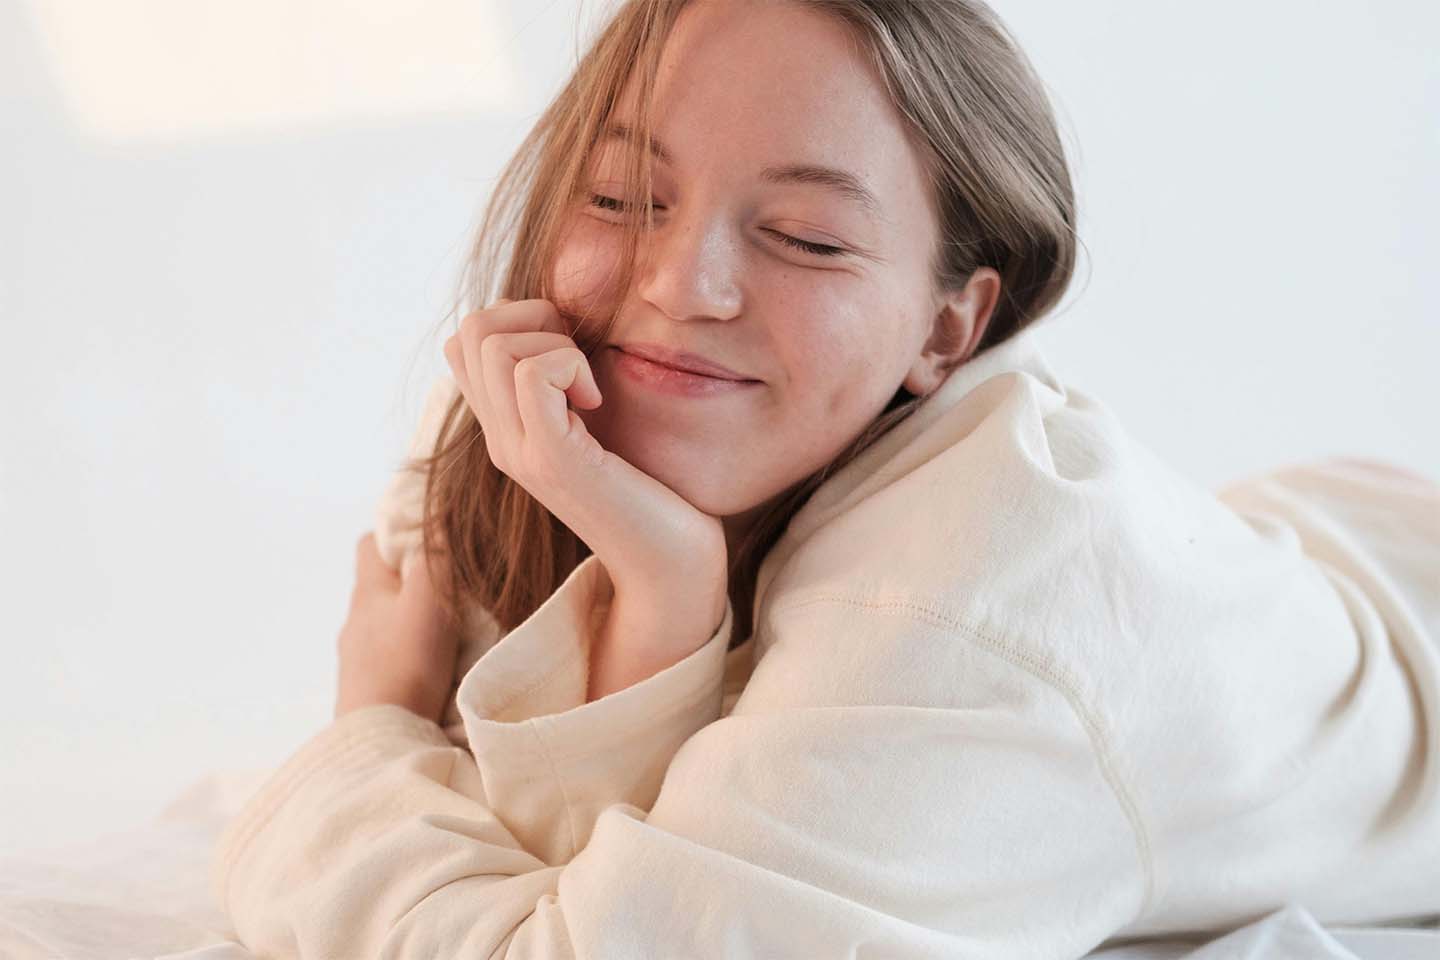 a woman smiling and chilling on bed in the morning